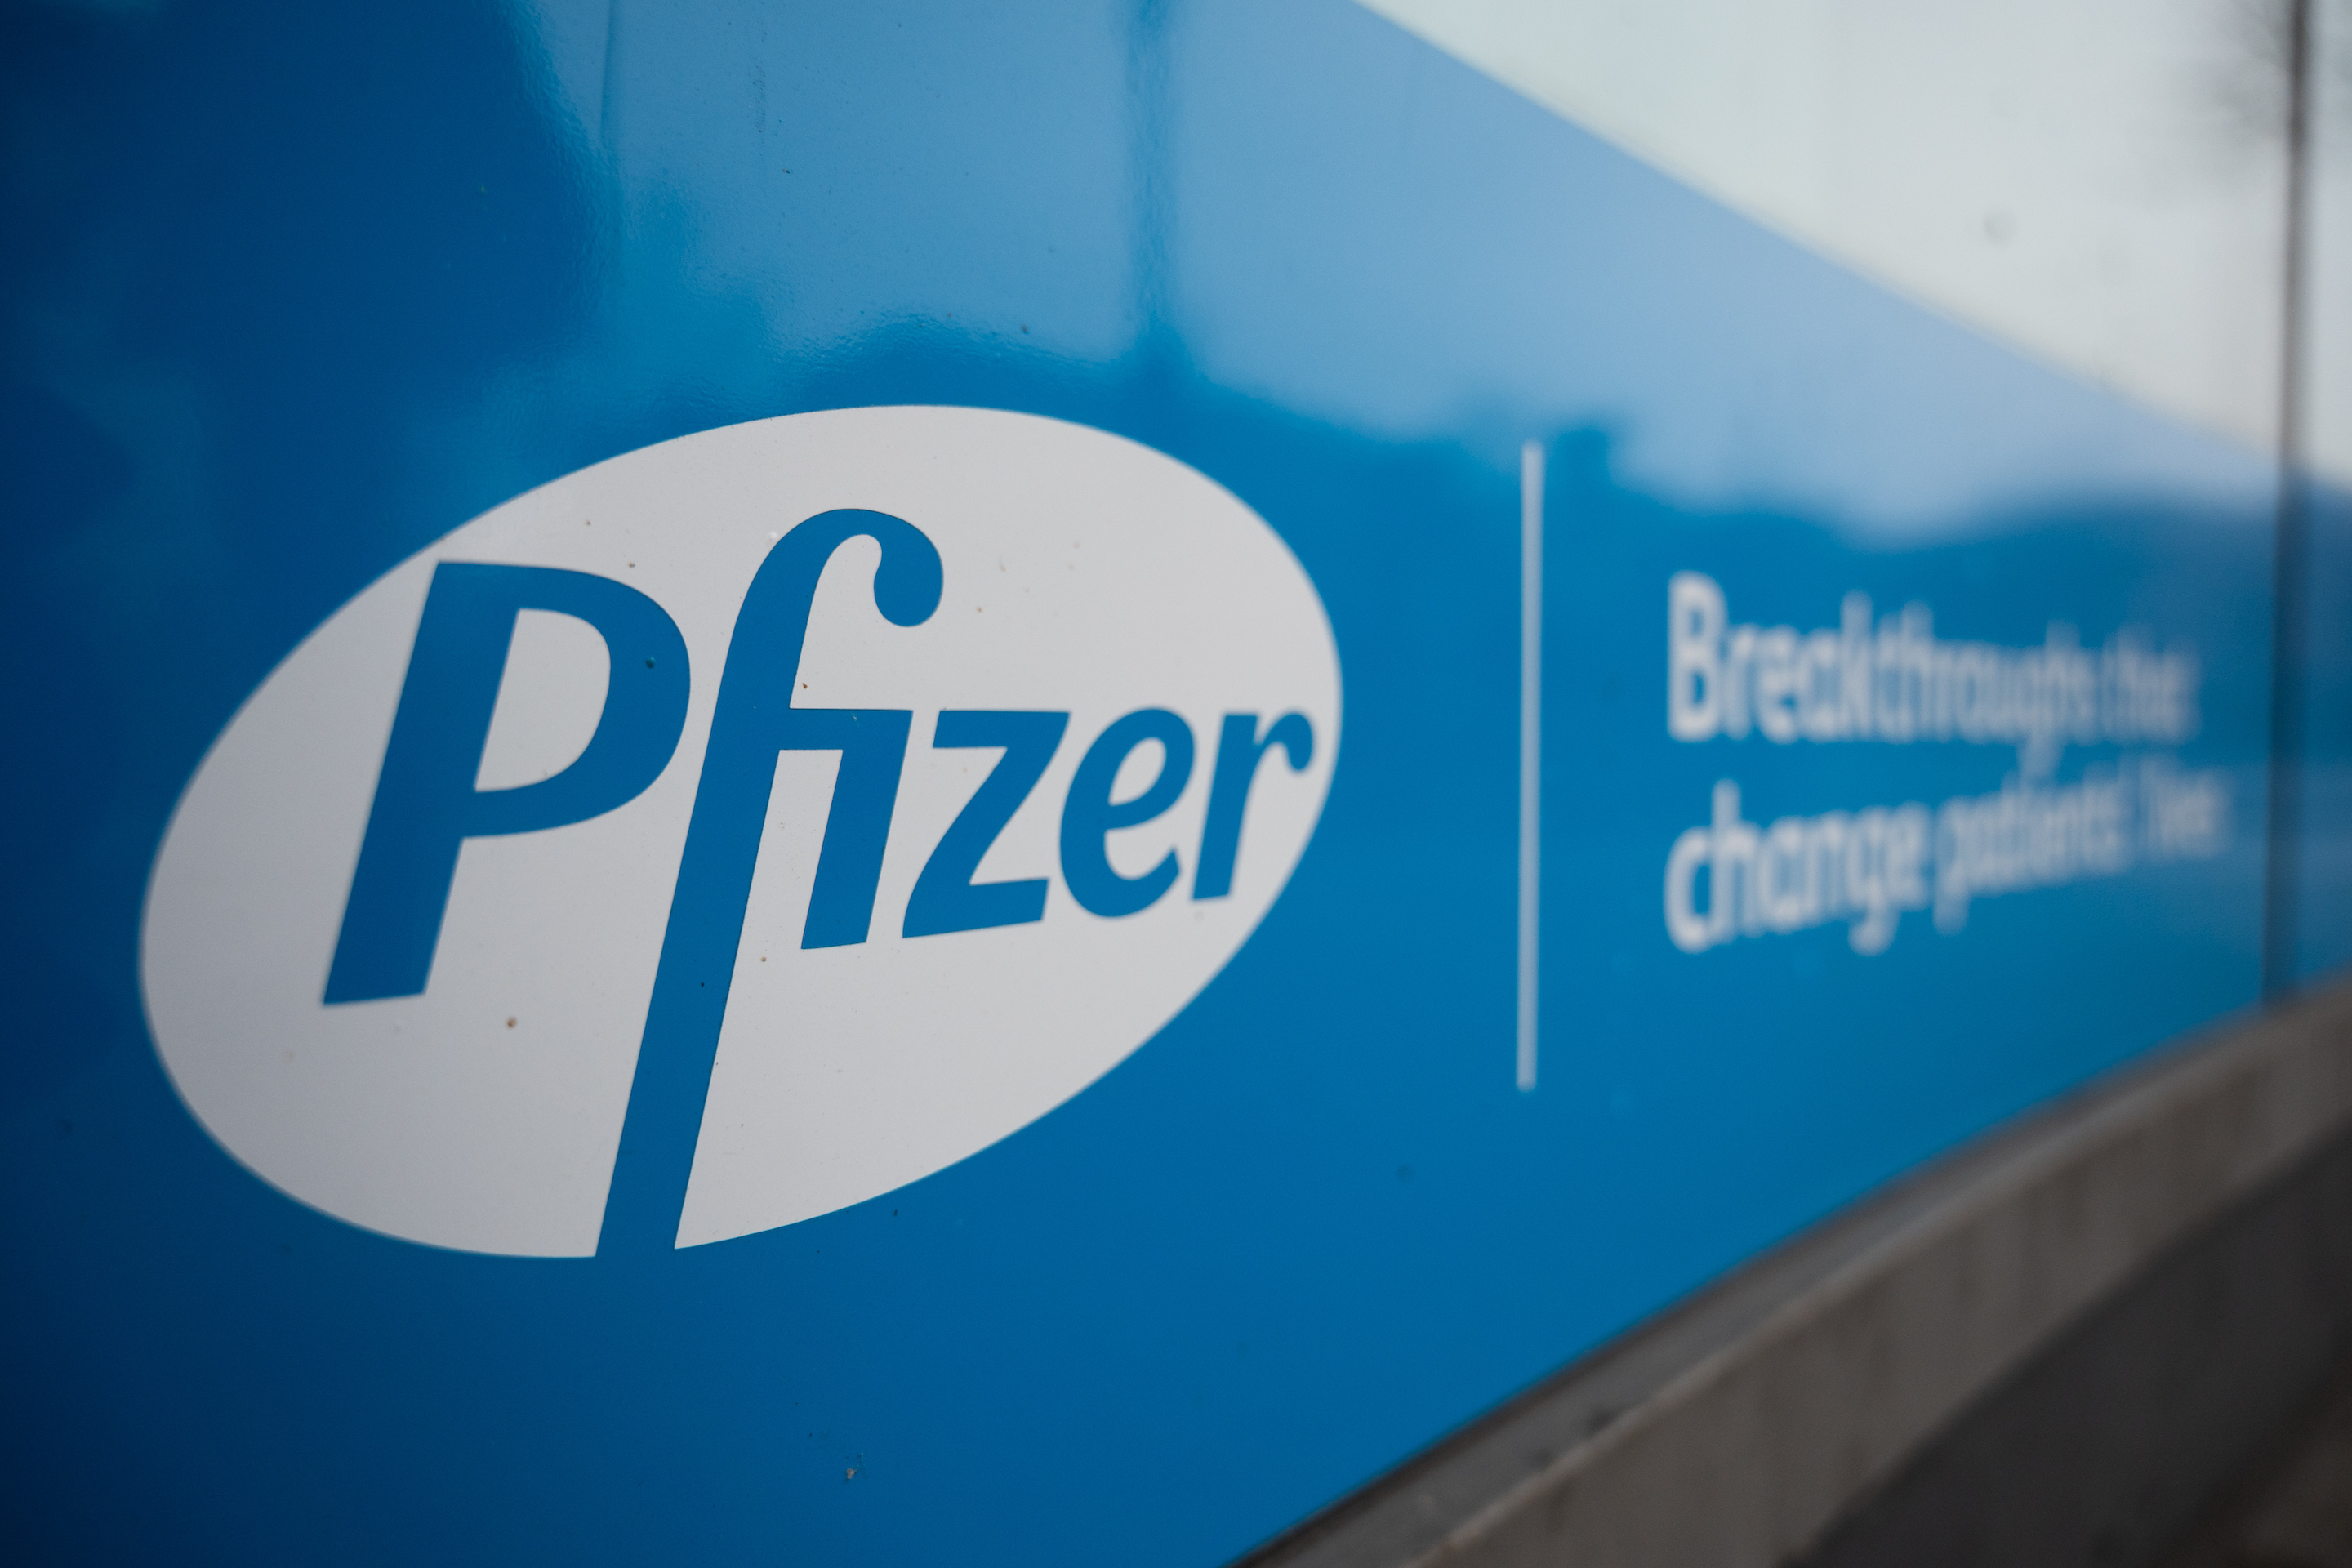 23 January 2021, Berlin: Pfizer's logo is displayed at one of its corporate offices. Since 2020, Pfizer has been working with the company Biontech on the development of a Covid 19 vaccine. Photo: Christophe Gateau/dpa (Photo by Christophe Gateau/picture alliance via Getty Images)